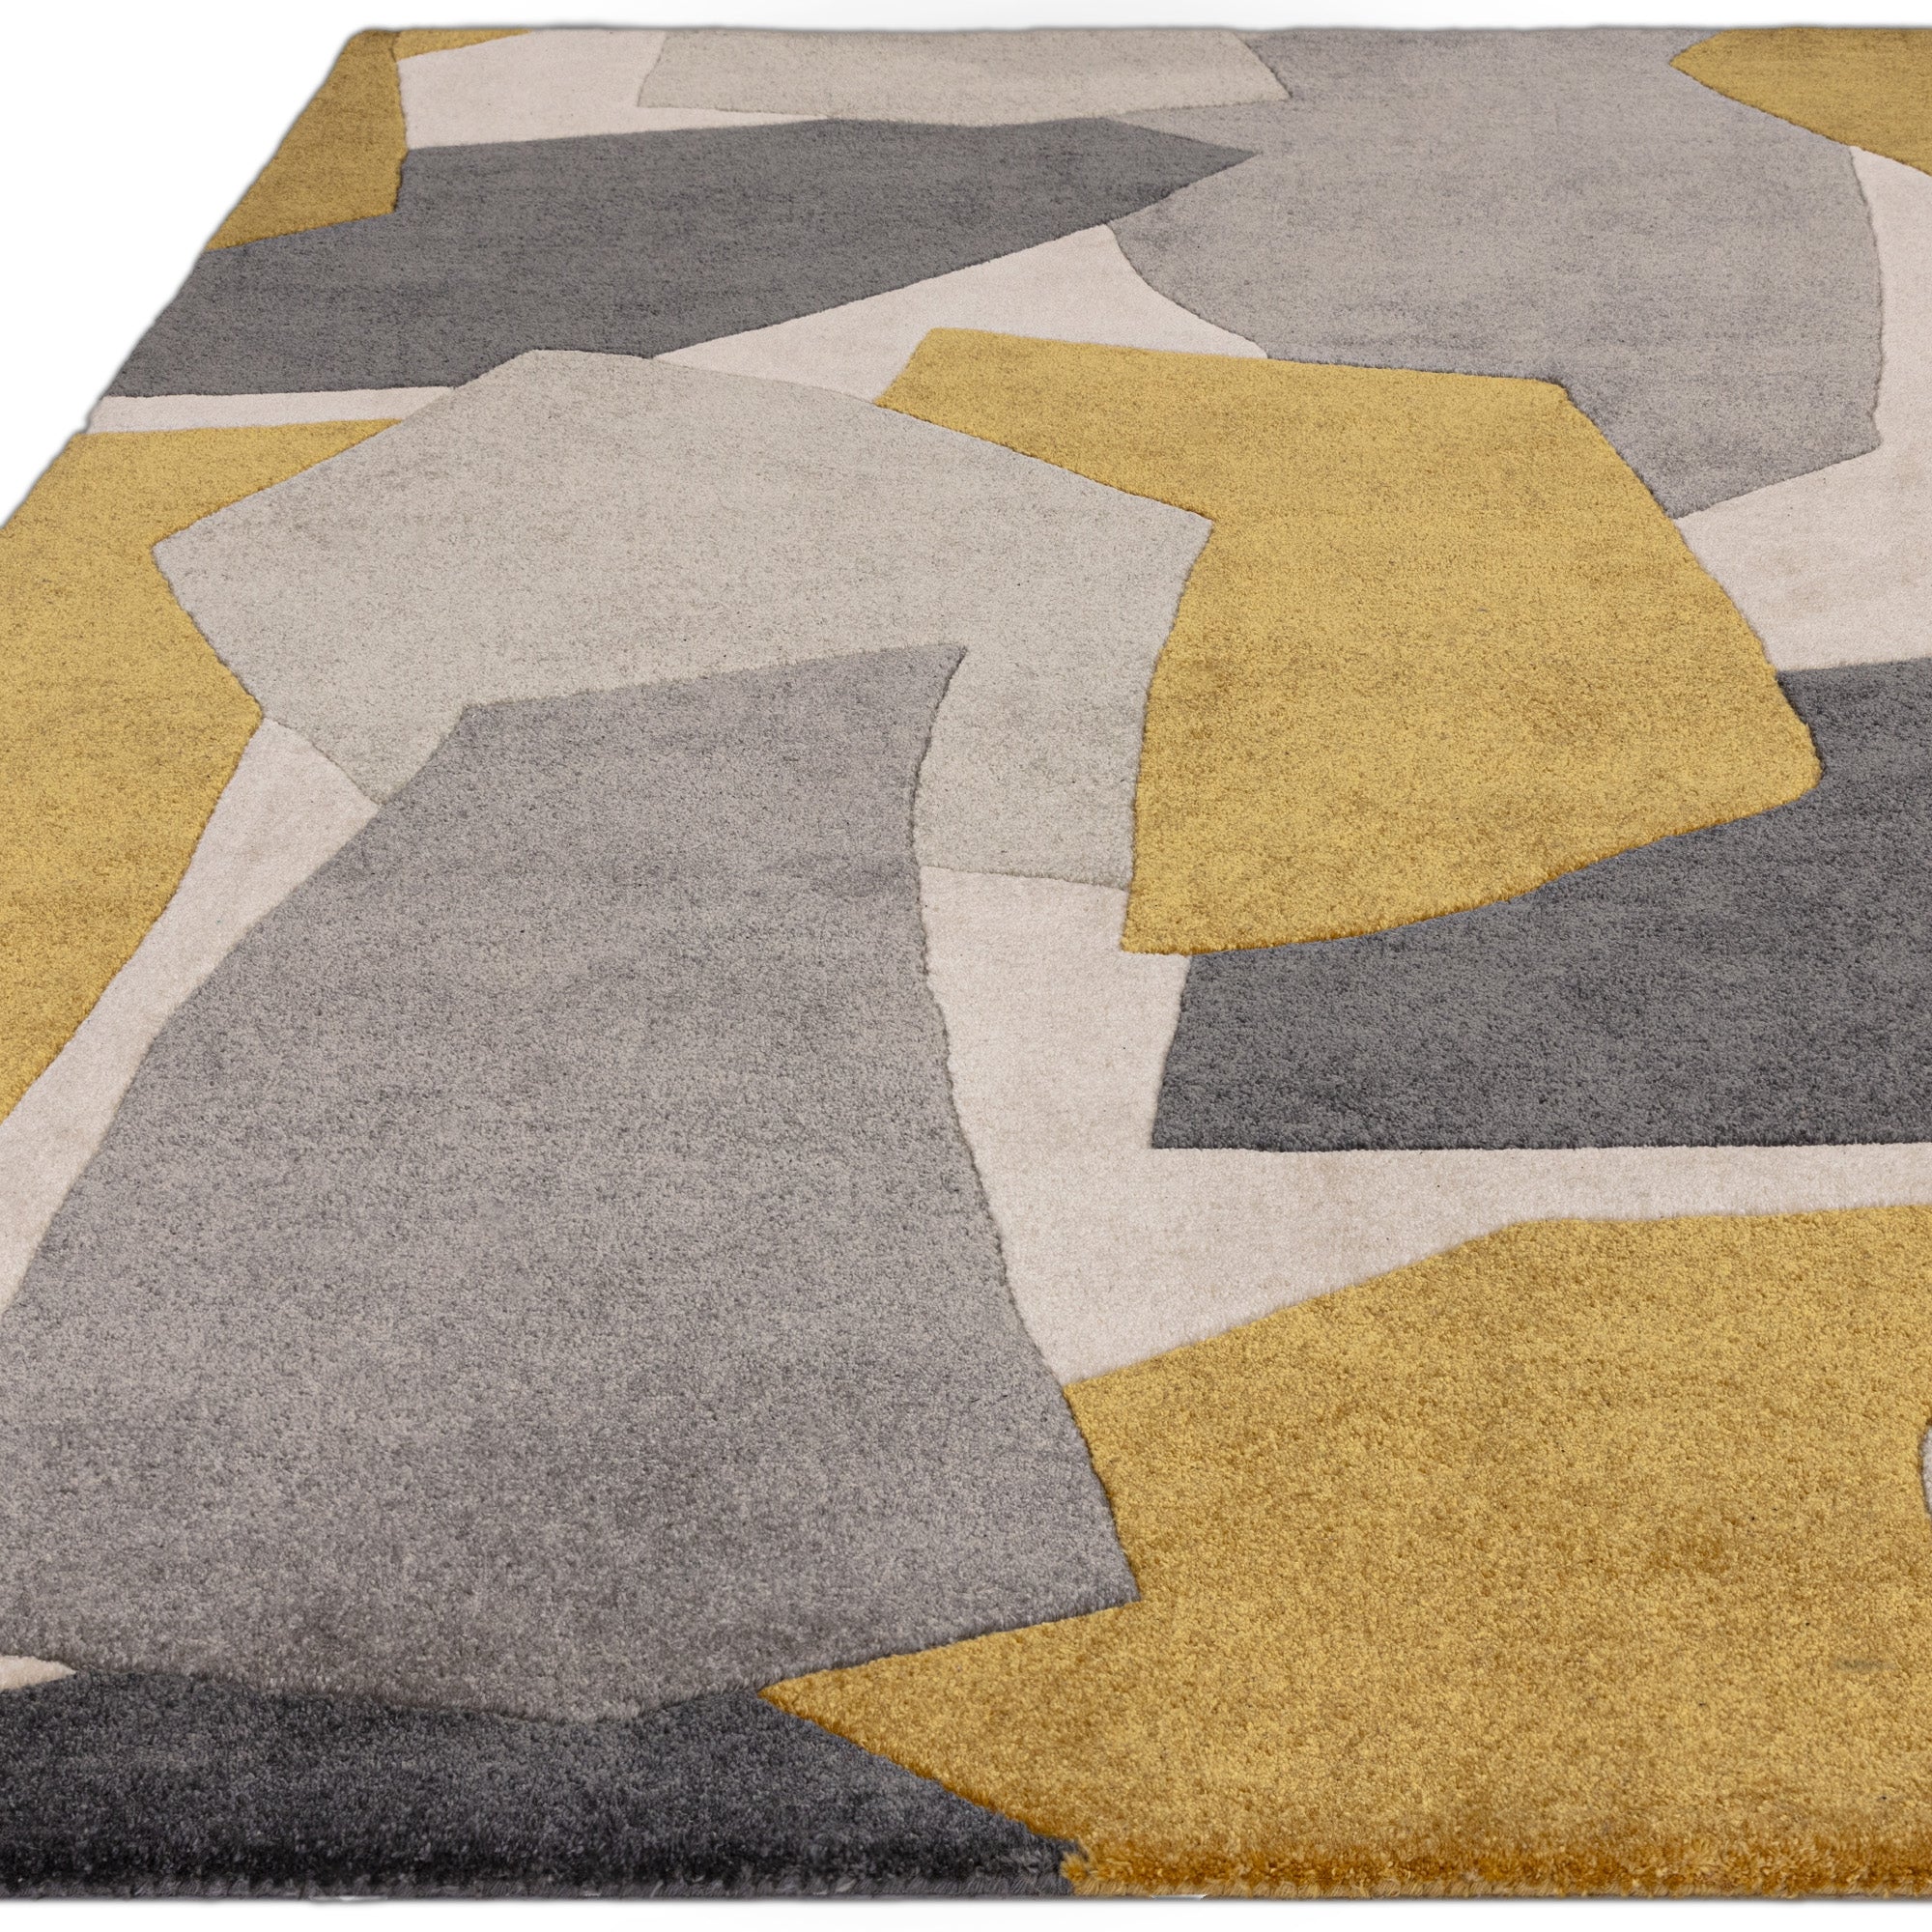 Multicolour rug with abstract pattern in orange, grey, and cream tones